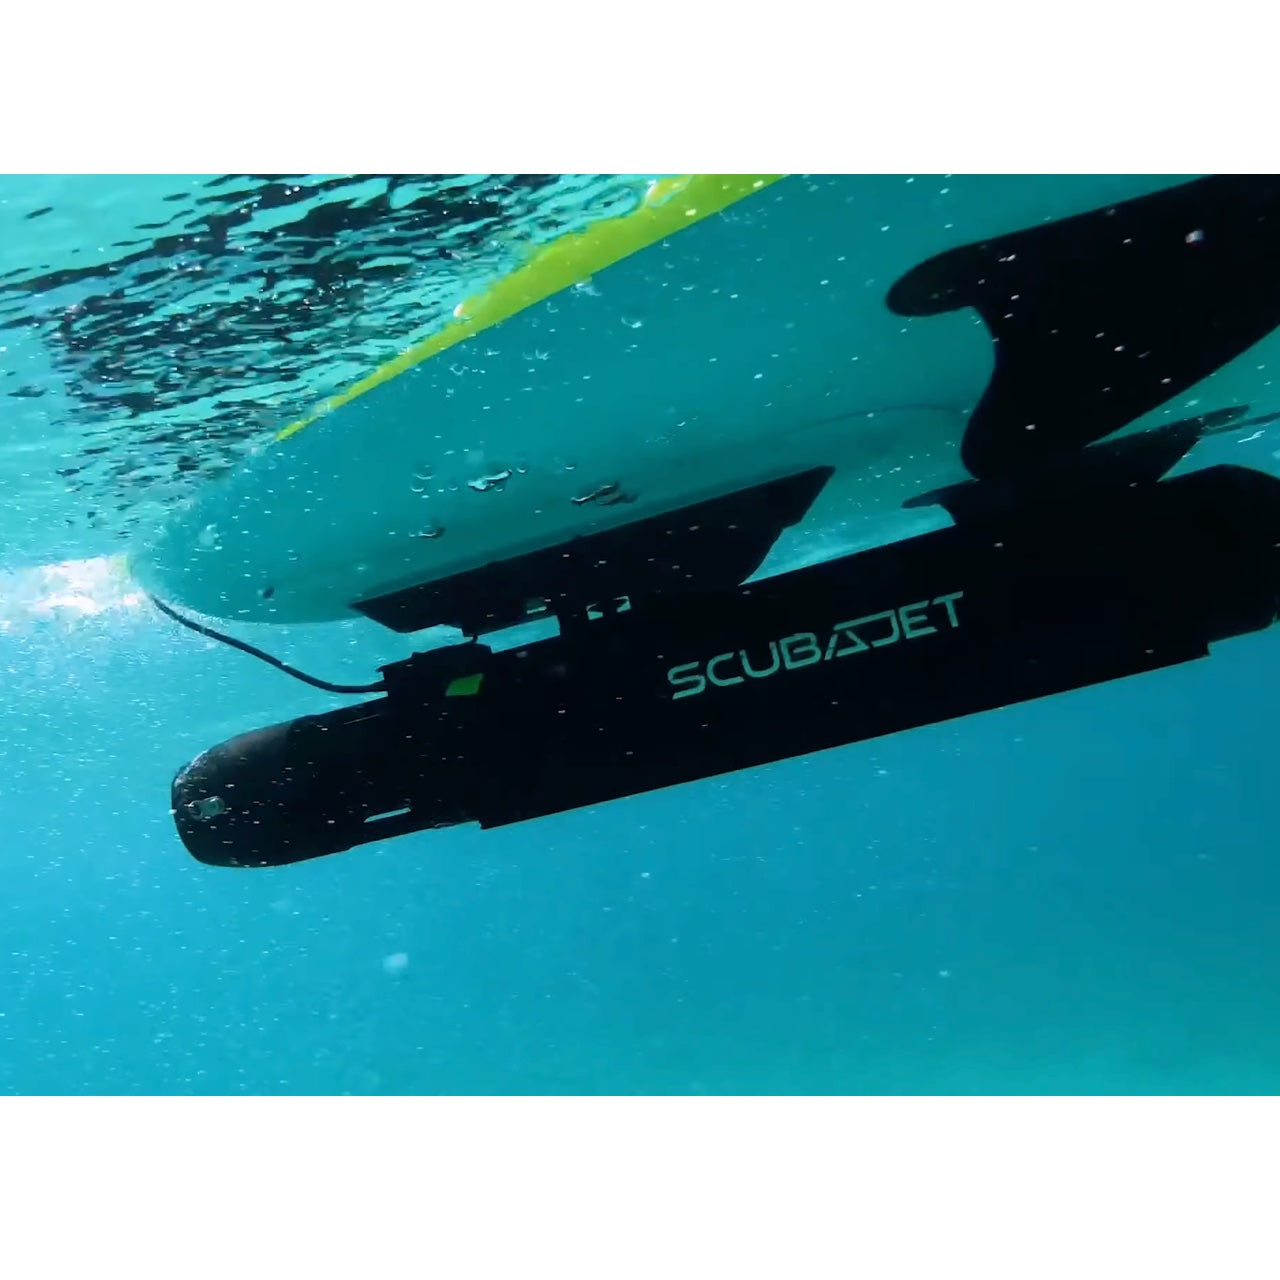 ScubaJet Pro Overwater Kit. All black ScubaJet is pictured along with the Remote Control with wristband, the motor unit, and the Fin Box Adapter One